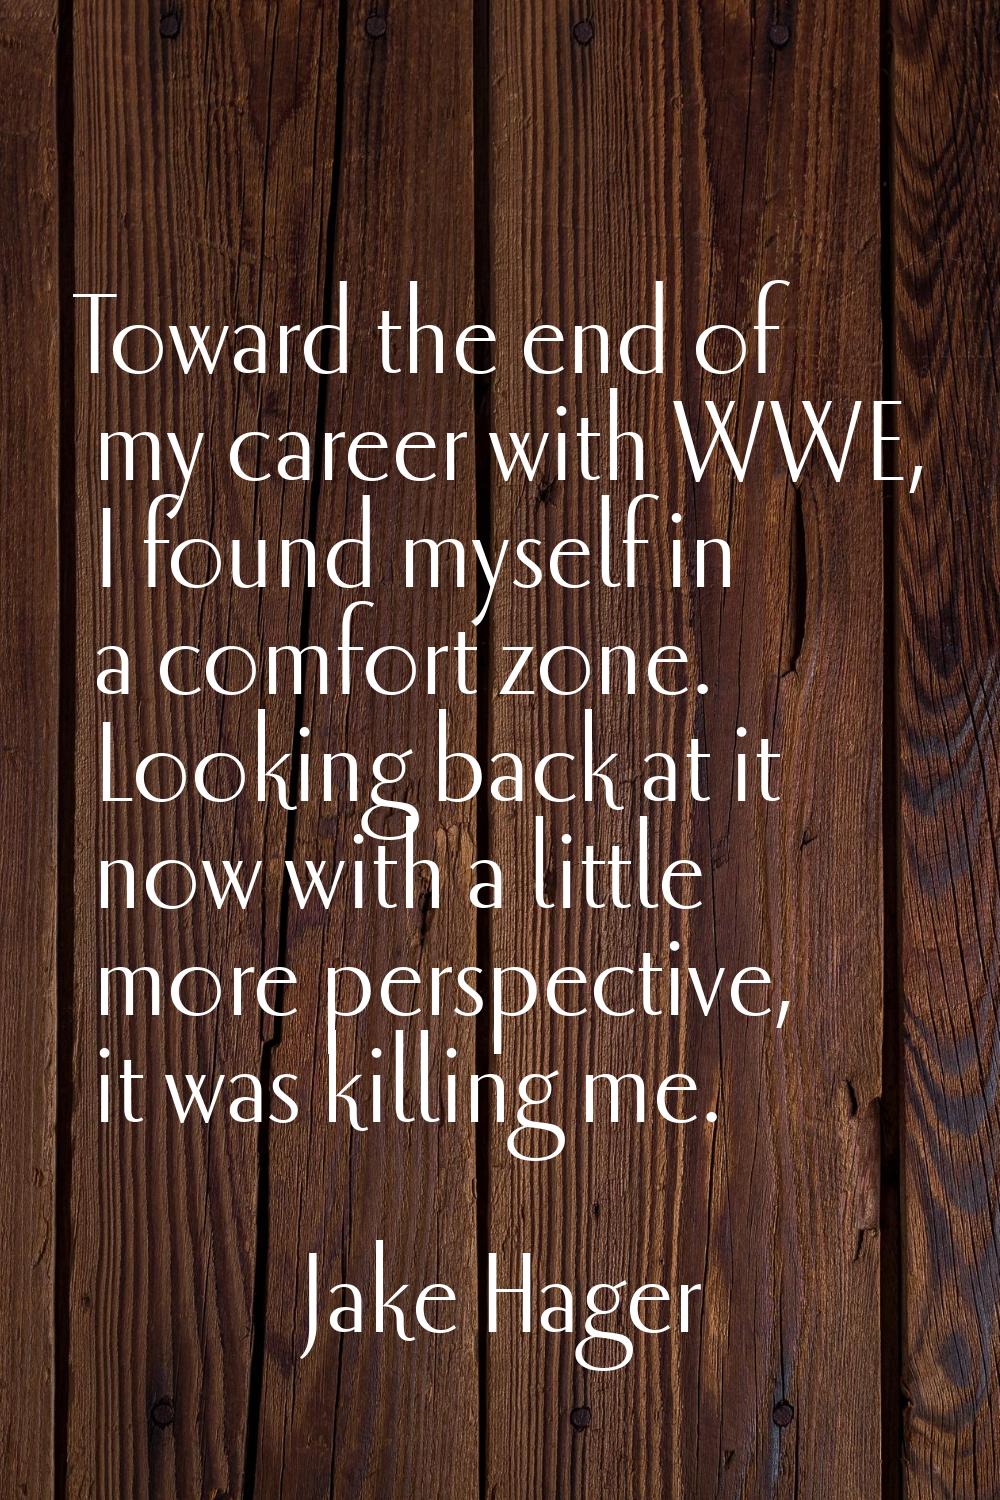 Toward the end of my career with WWE, I found myself in a comfort zone. Looking back at it now with